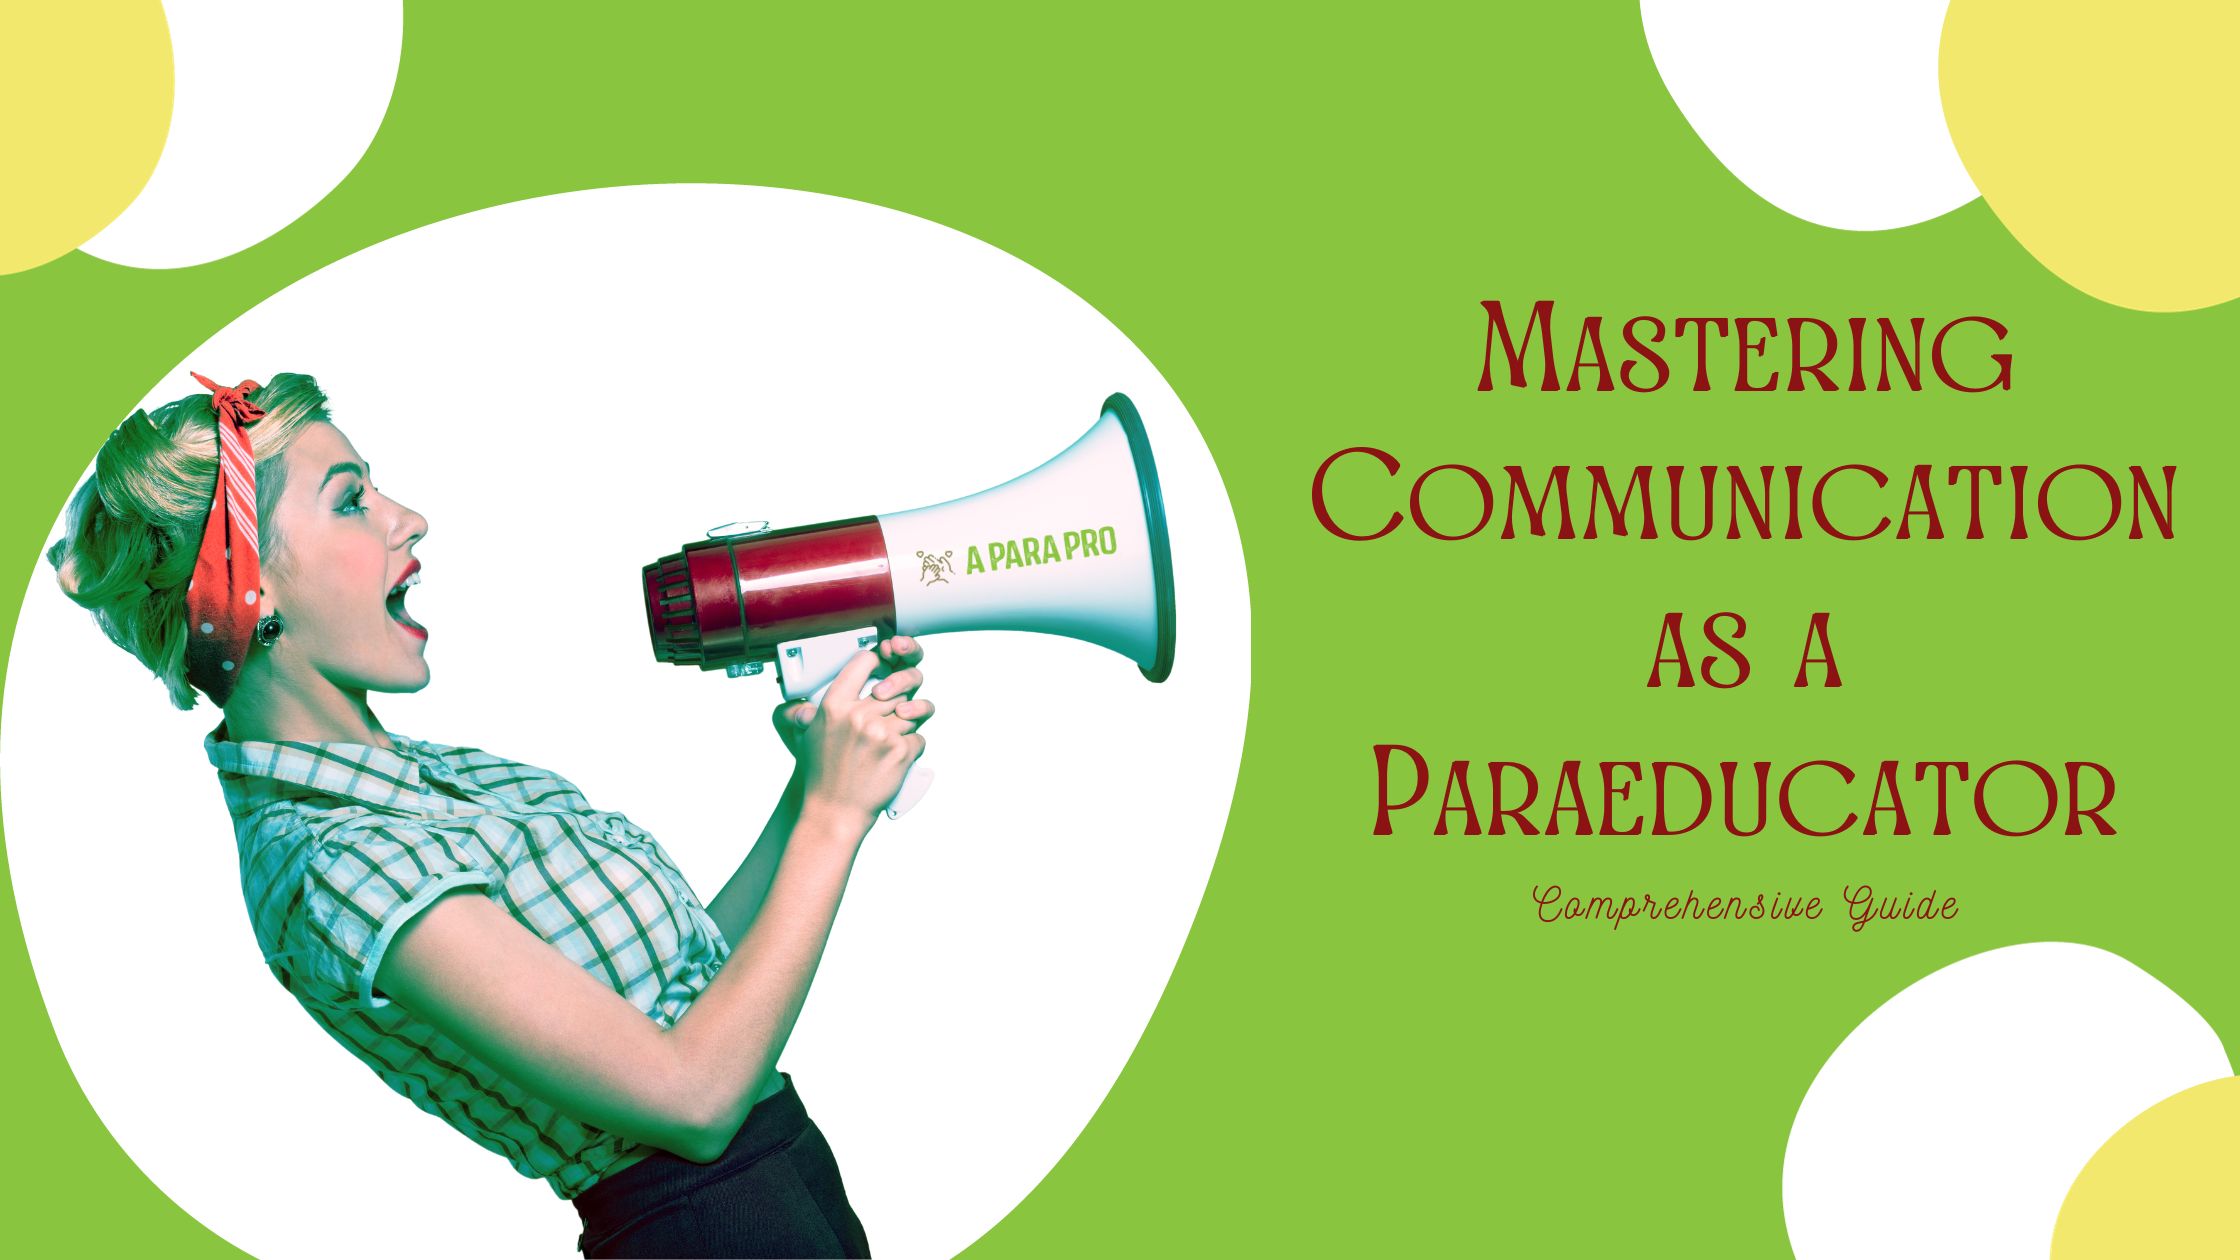 mastering communication as a paraeductor - a para pro featured image